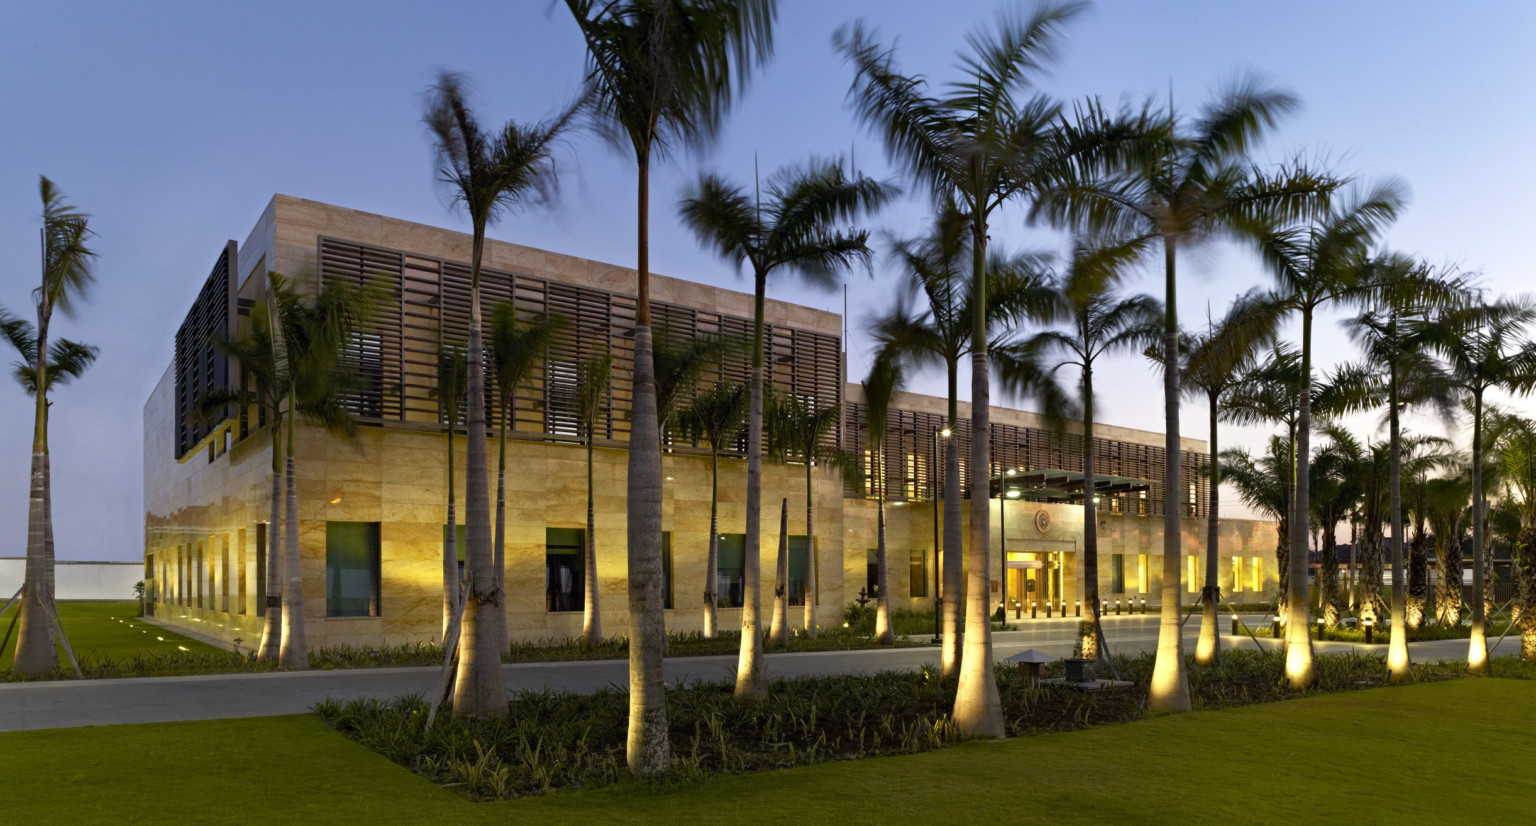 evening exterior view of US Consulate in Surabaya, Indonesia with palm trees and lighting features